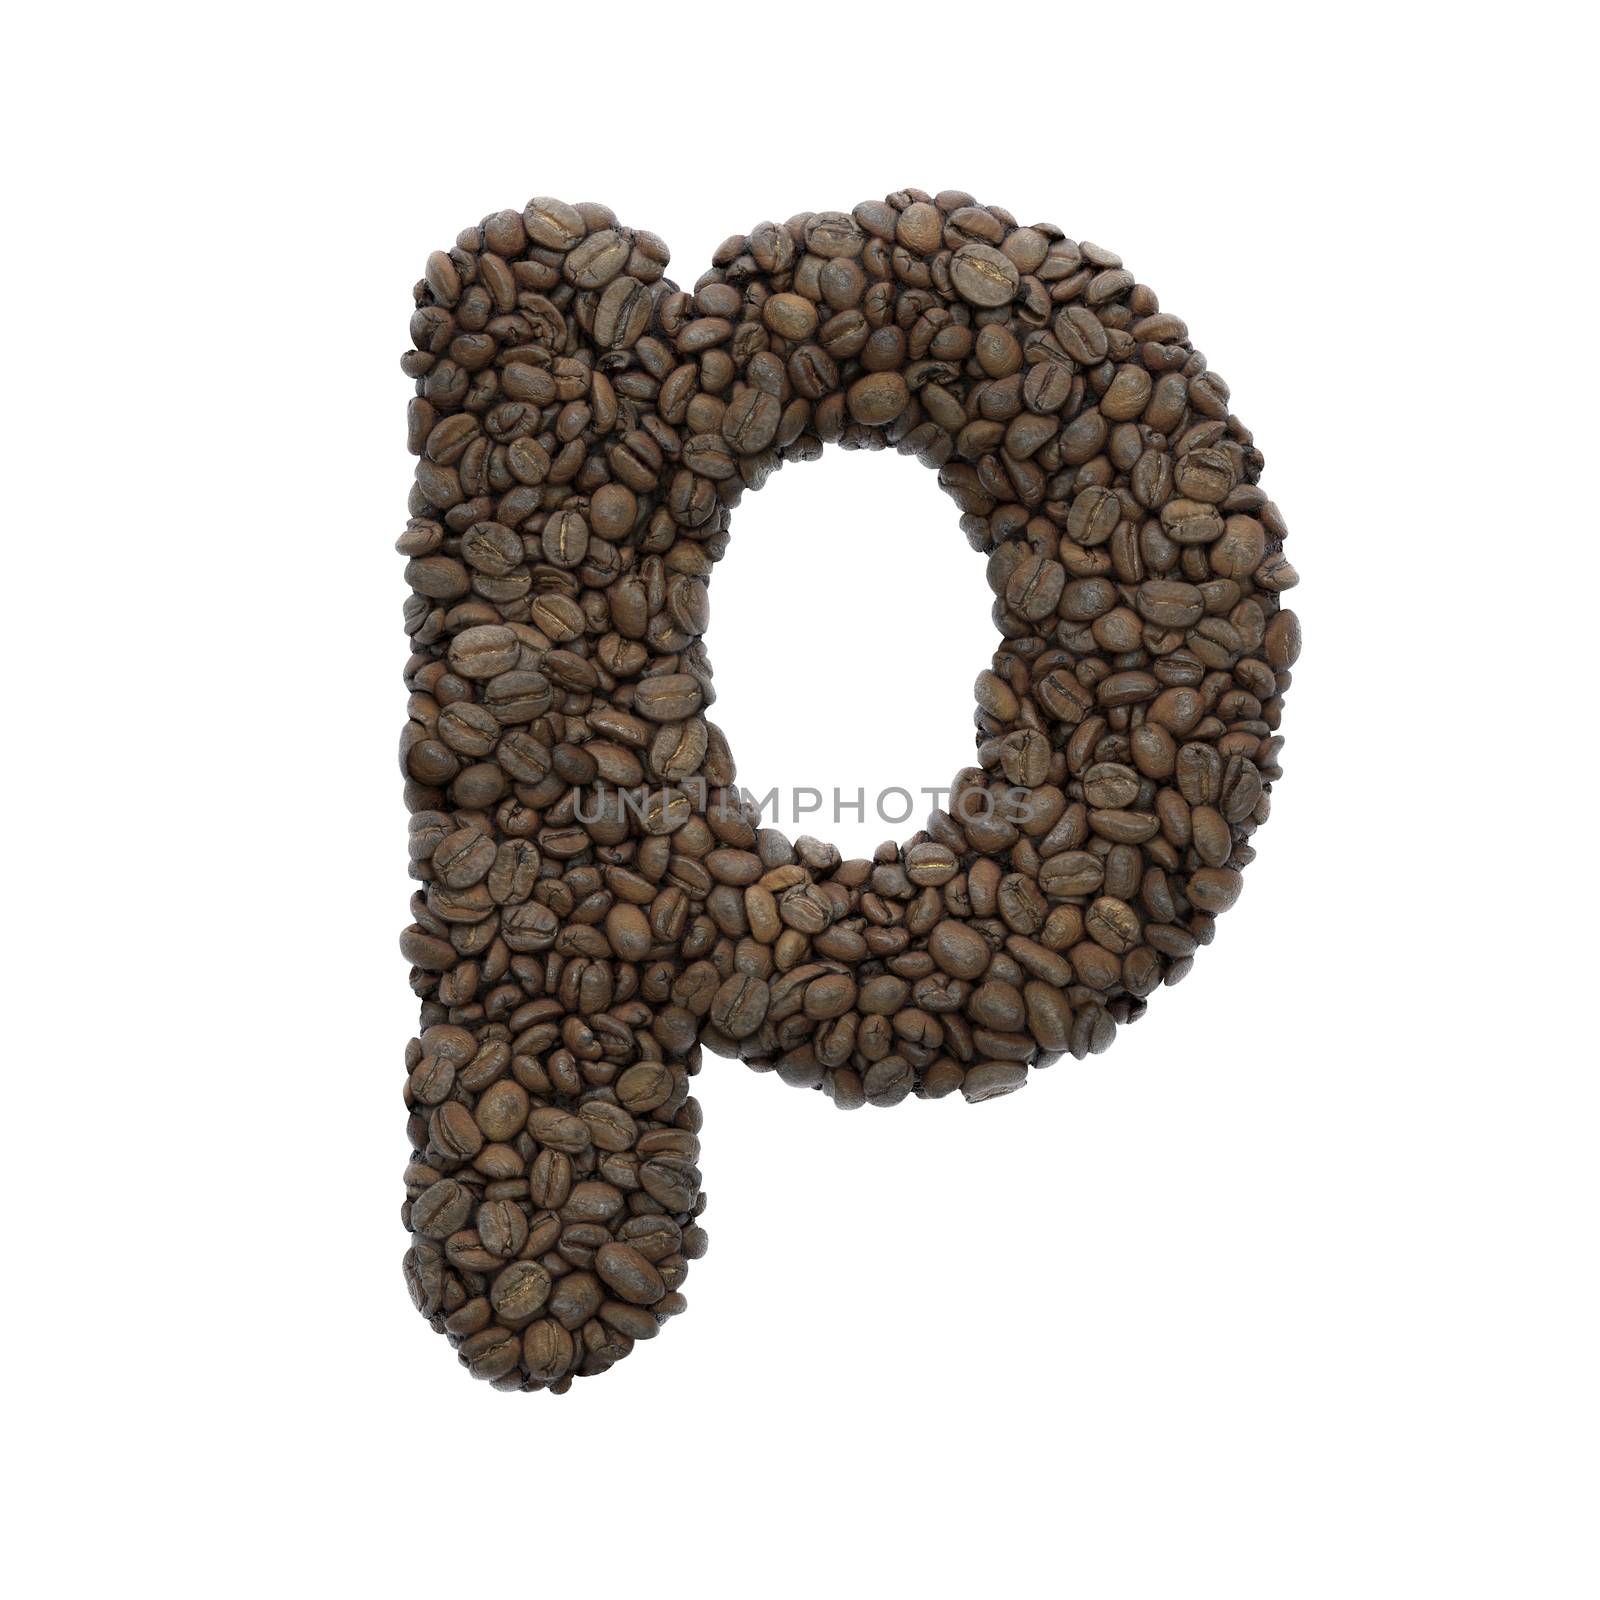 Coffee letter P - Lowercase 3d roasted beans font - Suitable for Coffee, energy or insomnia related subjects by chrisroll